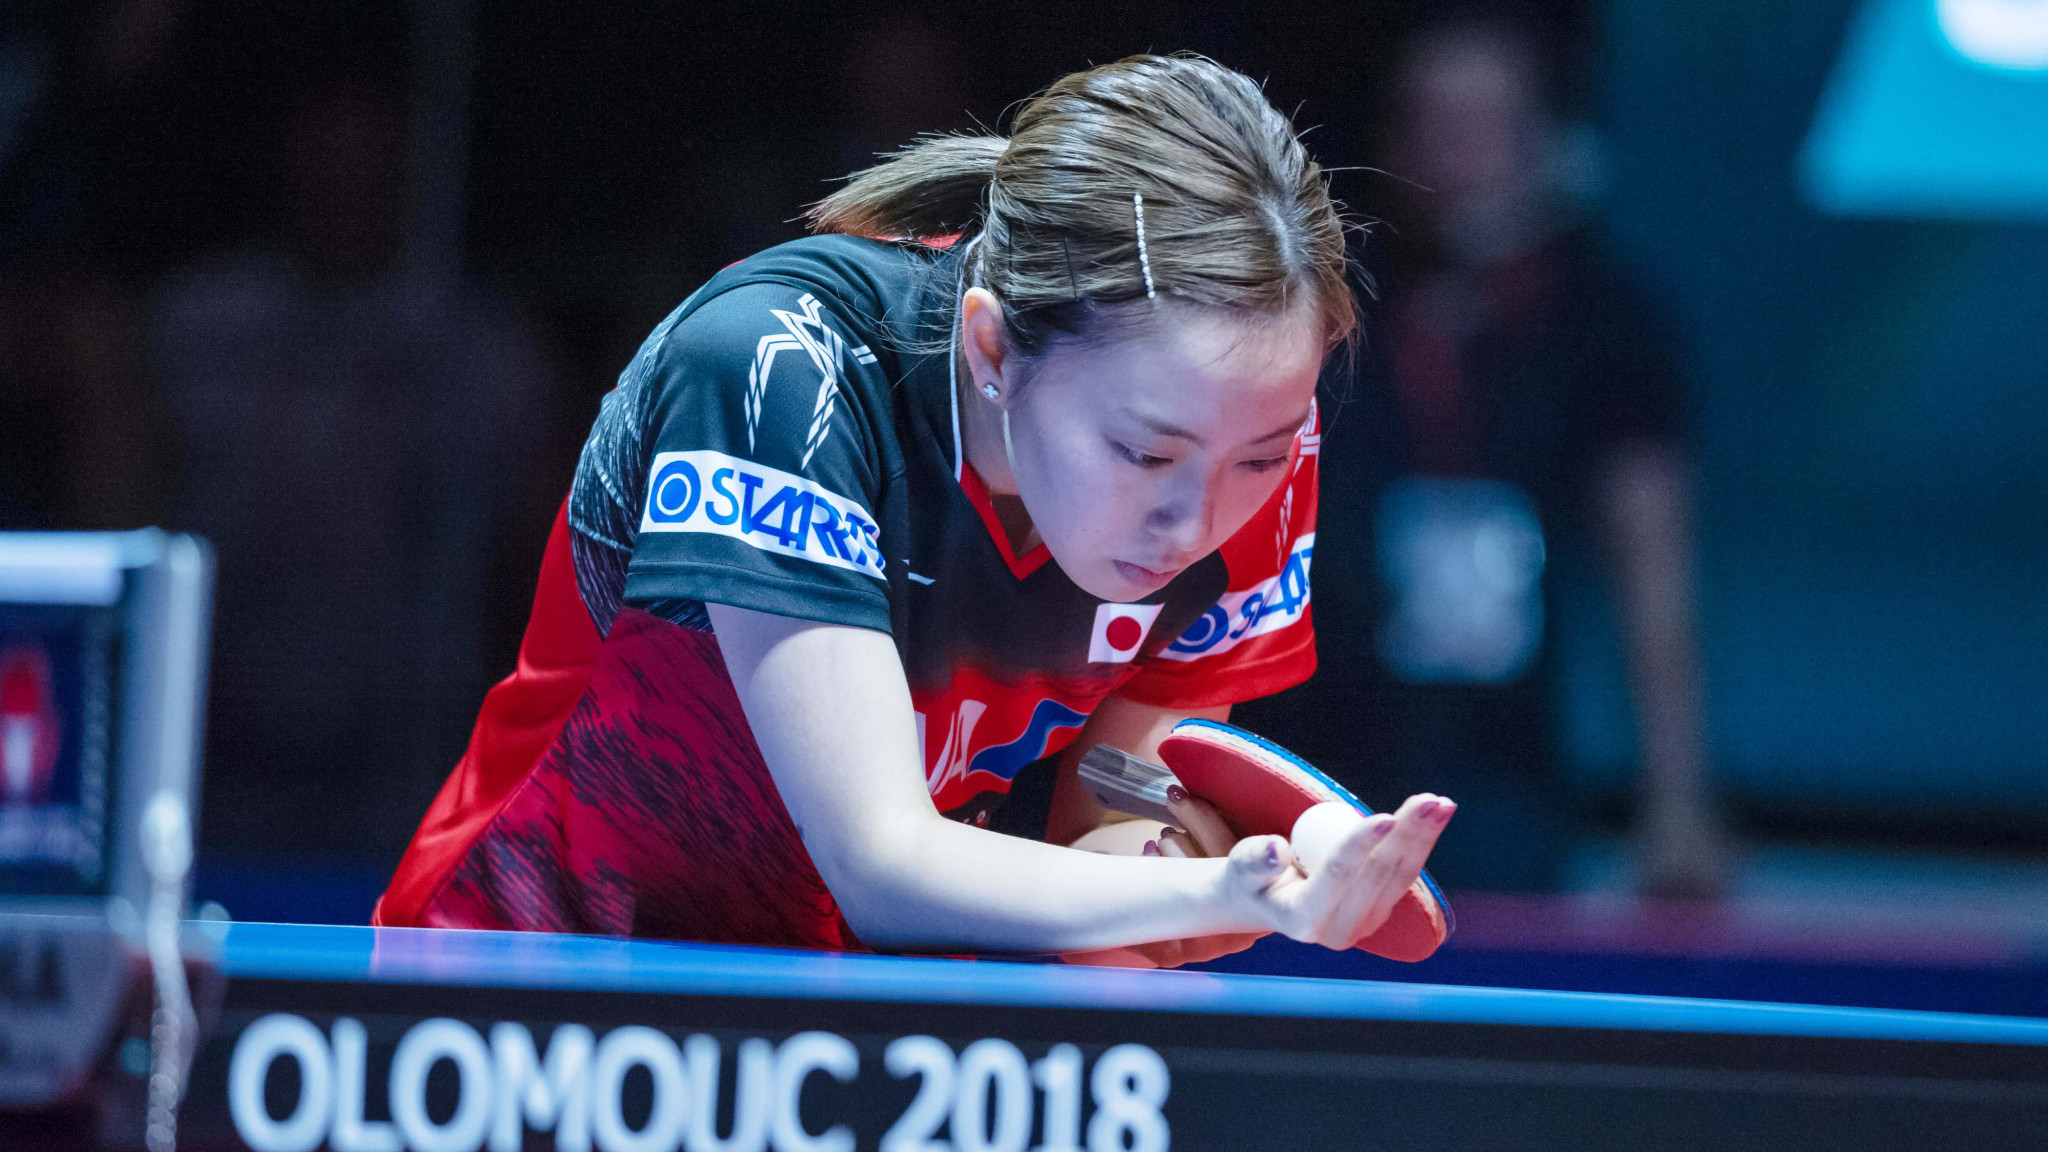 Top seed and defending champion Kasumi Ishikawa of Japan was made to work hard to earn a place in the women's singles round of 16 ©ITTF/Jan Brychta